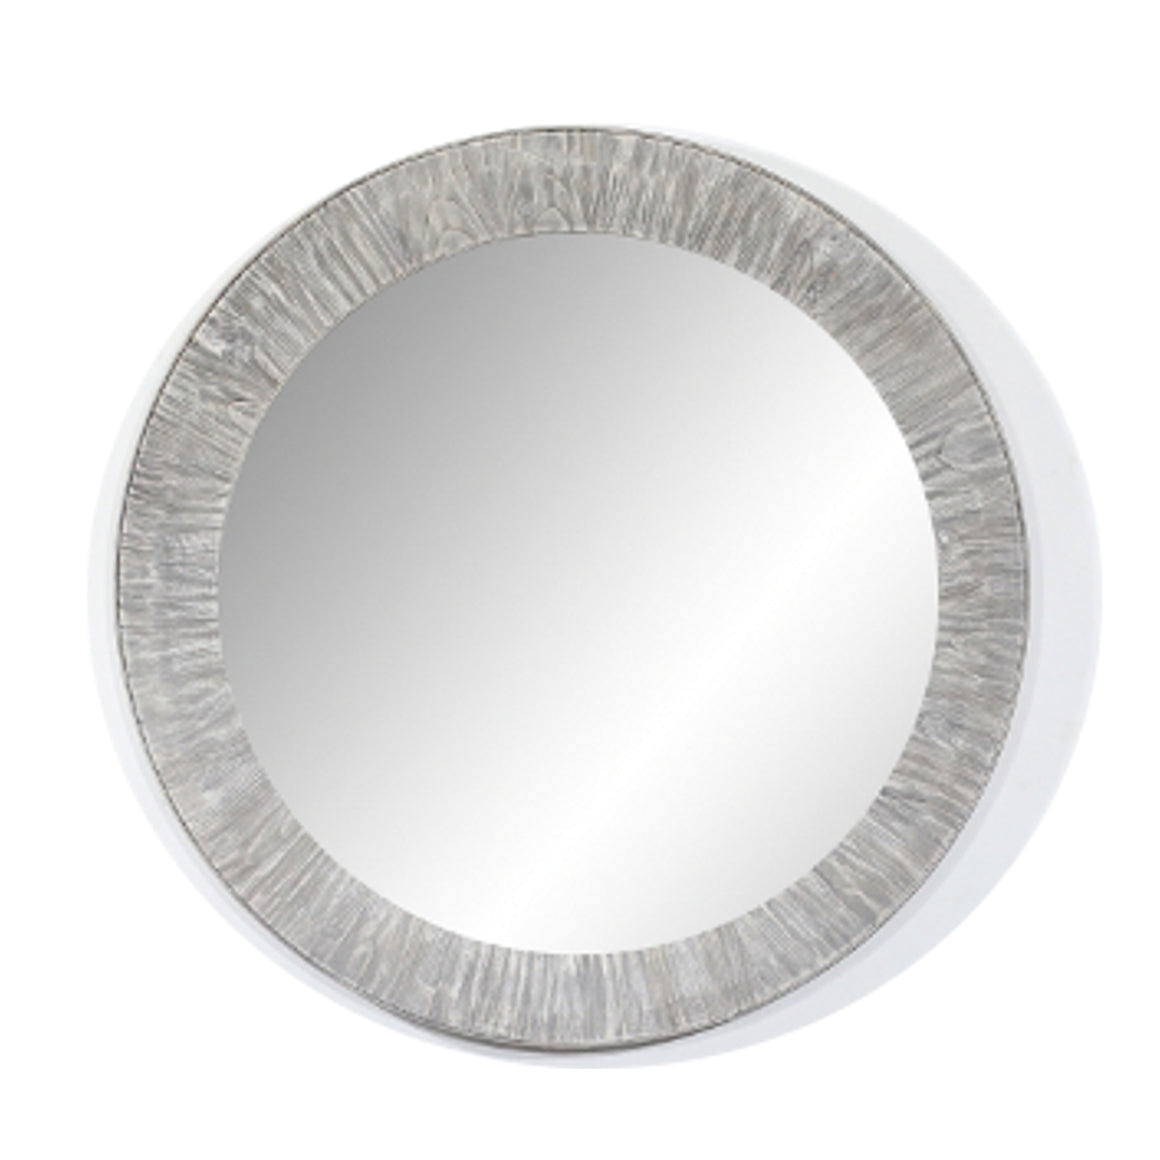 35" RUSTIC SOLID FIR MIRROR IN GREY DRIFTWOOD(ROUND)